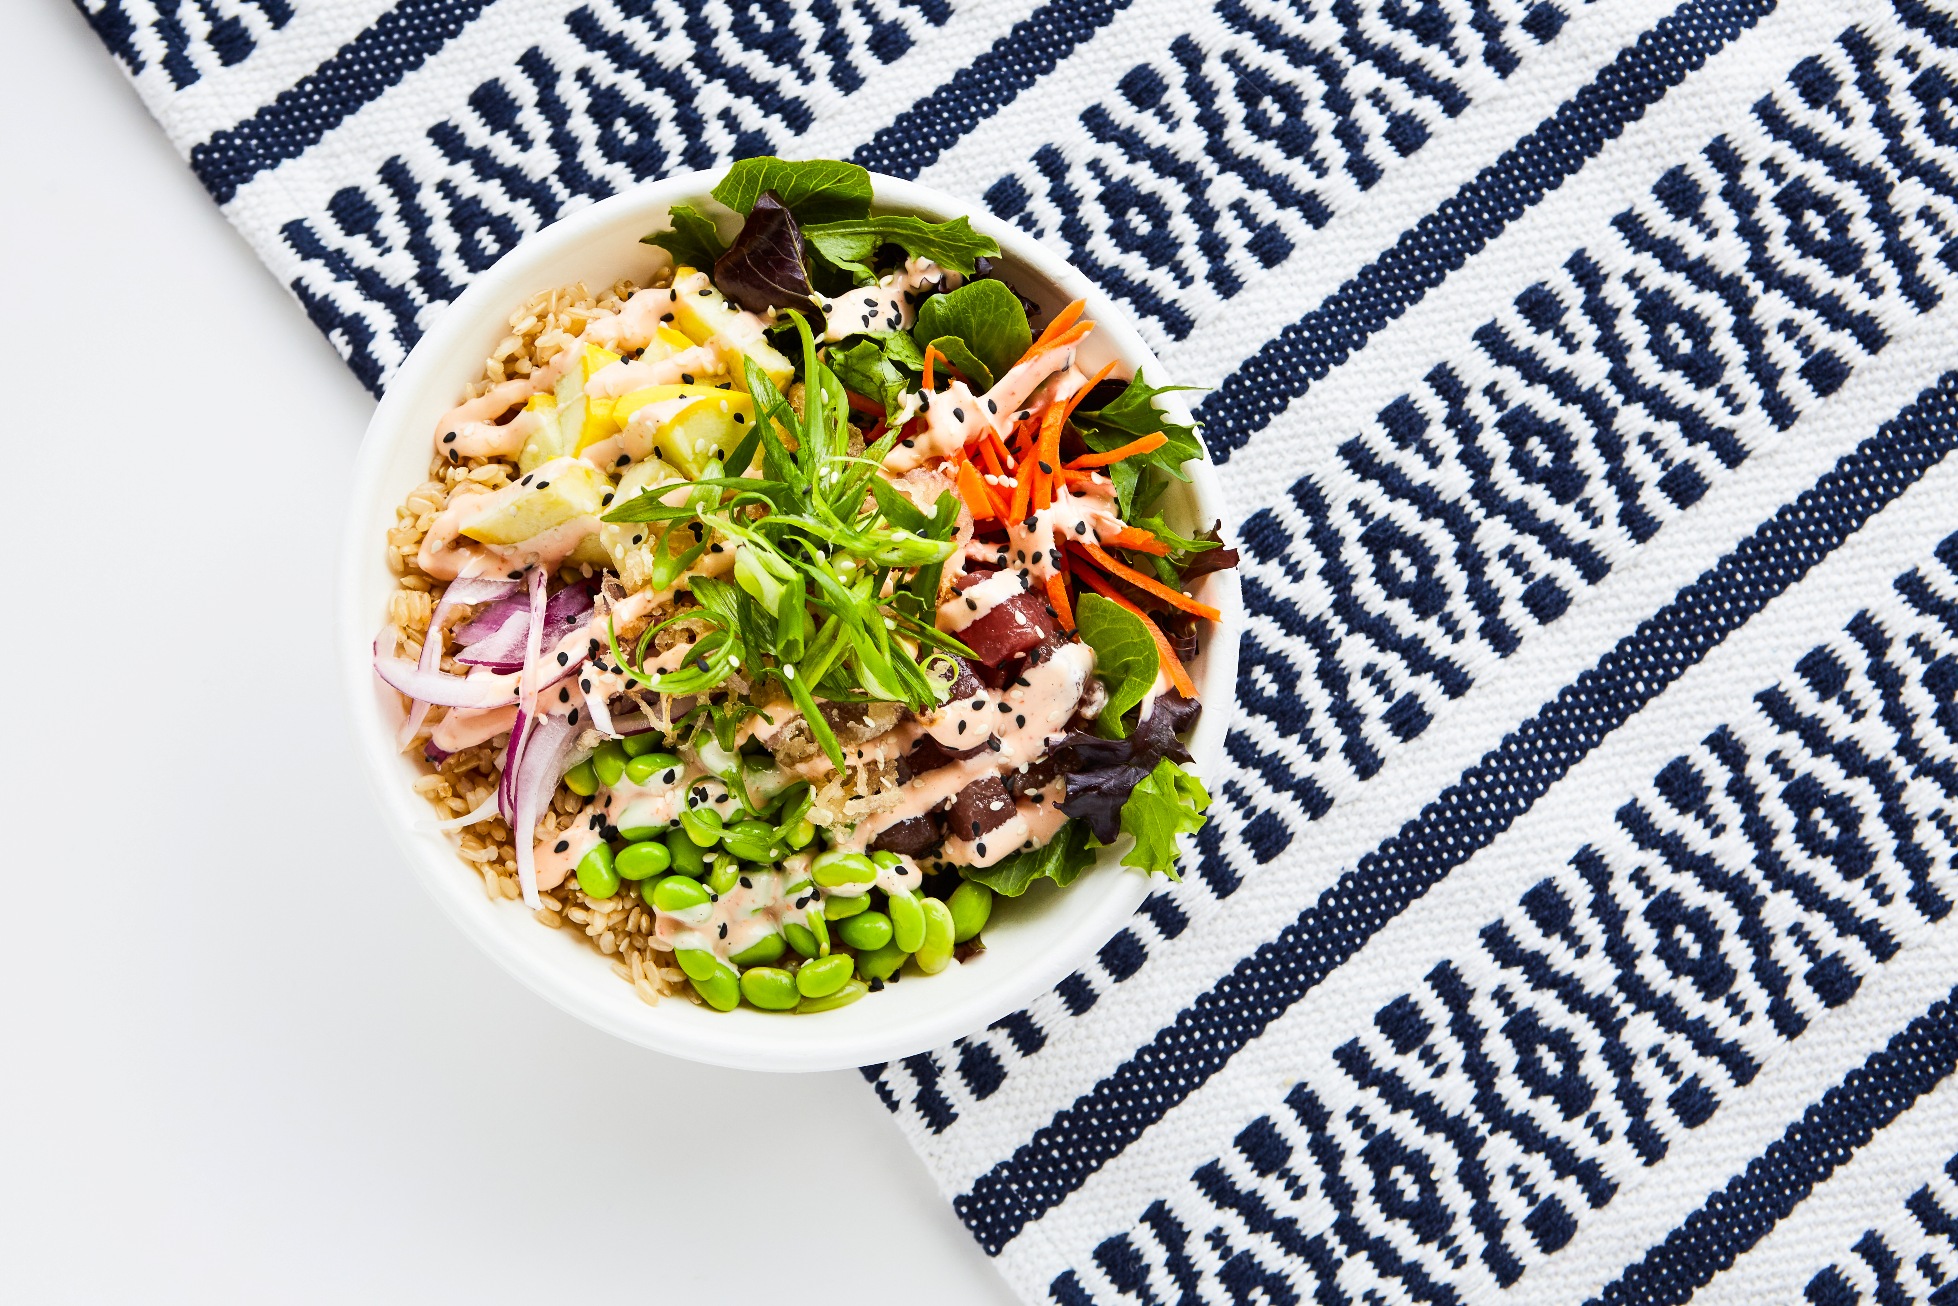 Poke bowls with fresh ingredients including tuna &amp; chicken with fresh vegetables sauced up in BPI certified compostable bowls on a white table with a navy blue printed graphic runner.